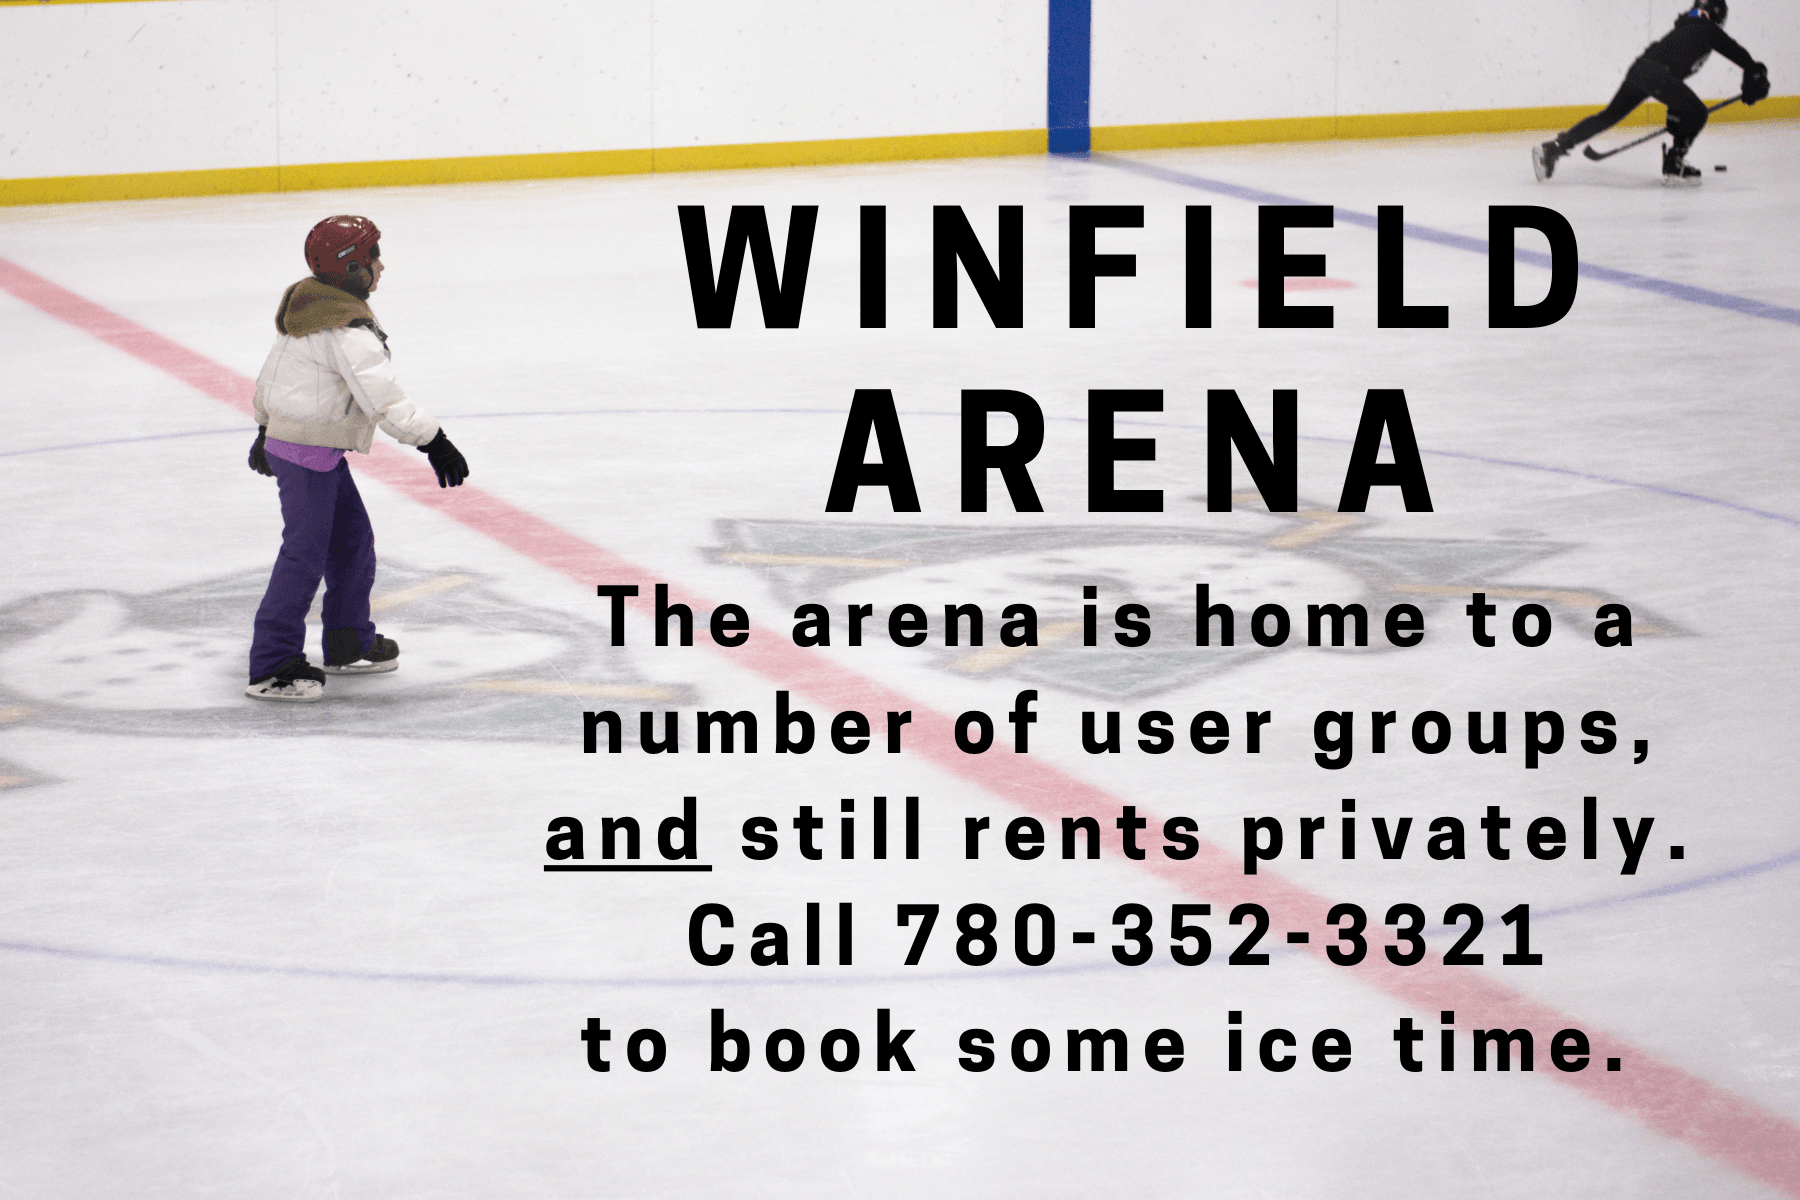 Winfield Arena Closed for Remainder of Season